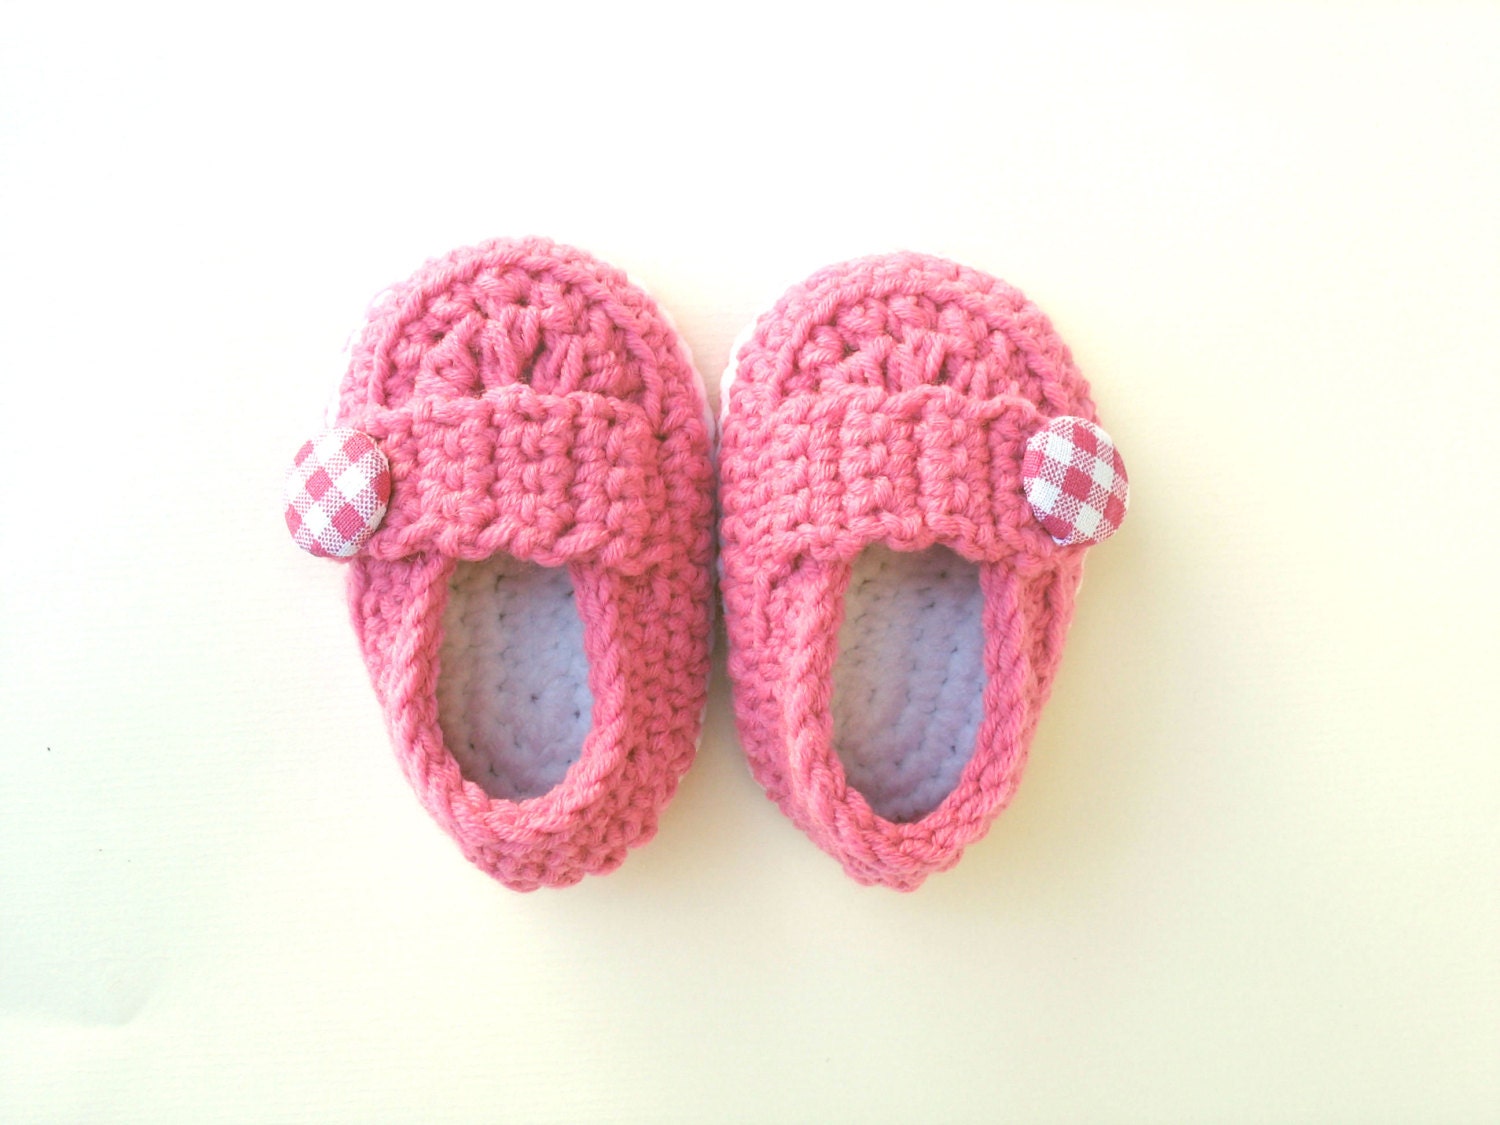 Pink baby shoes, Baby Girl Shoes, Cute button loafers, Baby Booties, Baby Shower gift, Baby shoes in Blossom pink and white trim. - VeraJayne